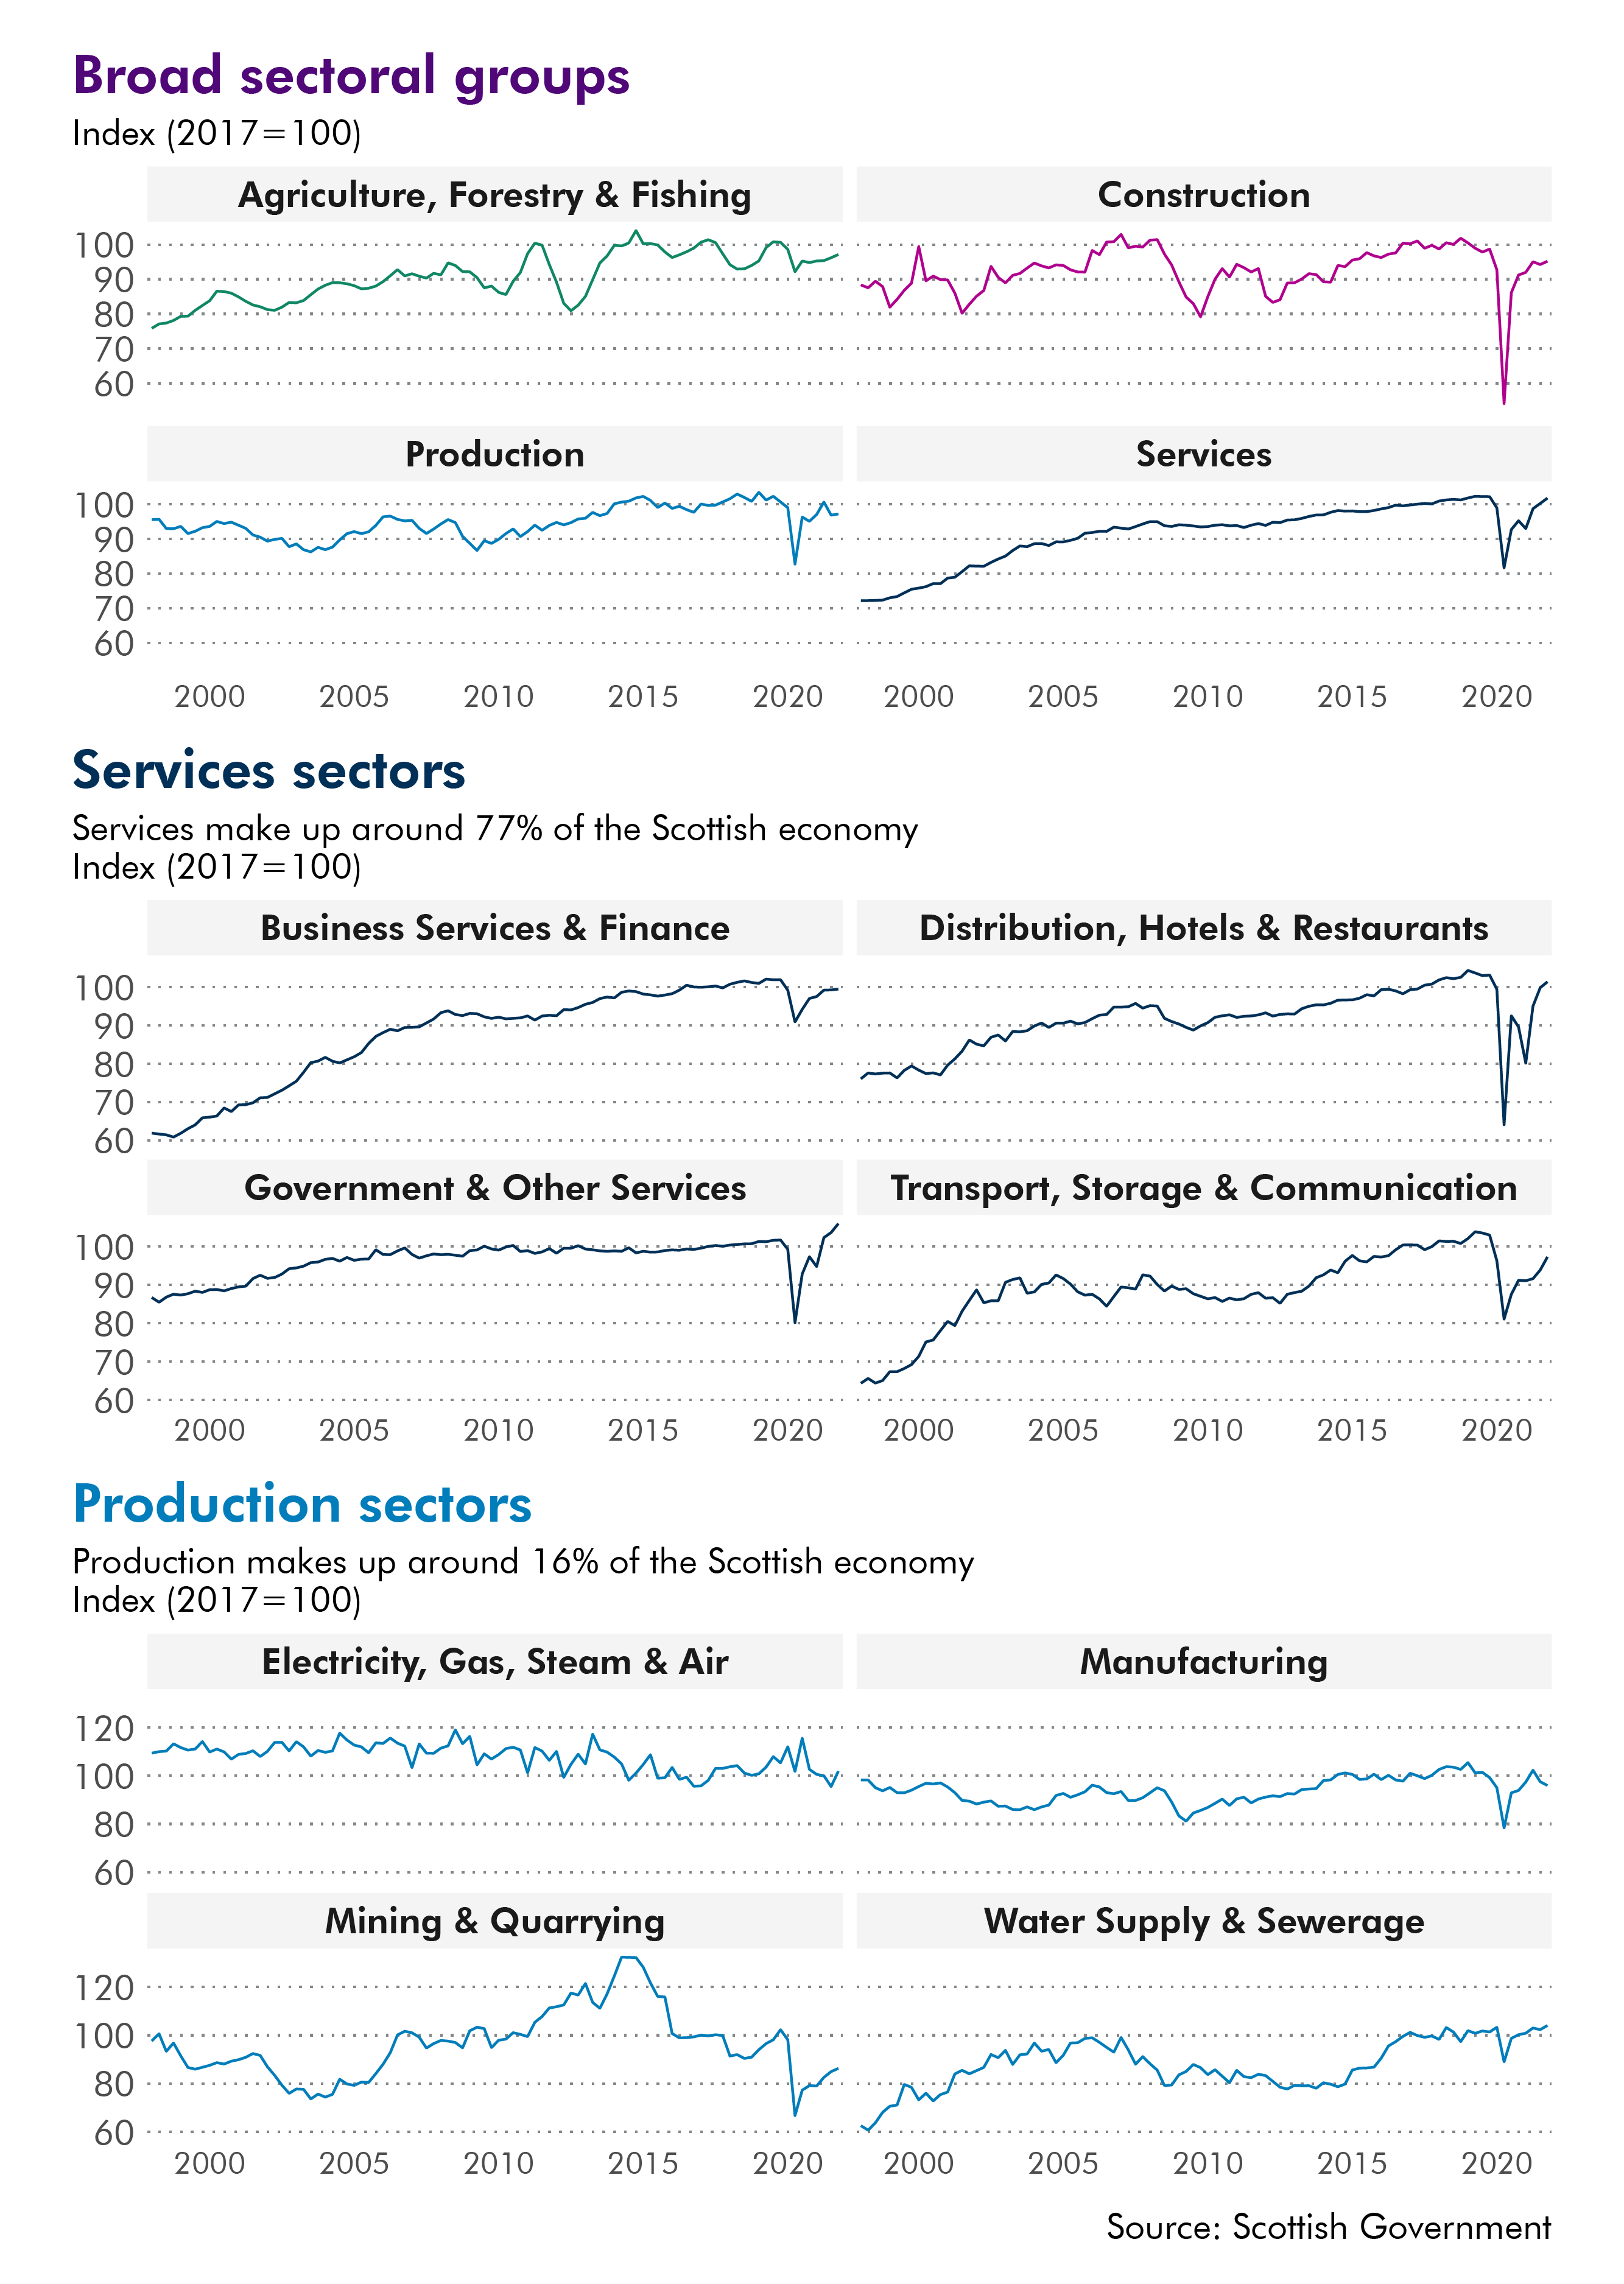 Twelve line charts showing economic output growth by sector. Four showing the growth for the high level sectors, four showing services sub sectors and four showing the production sub sectors. The data for this image can be downloaded from the link below.